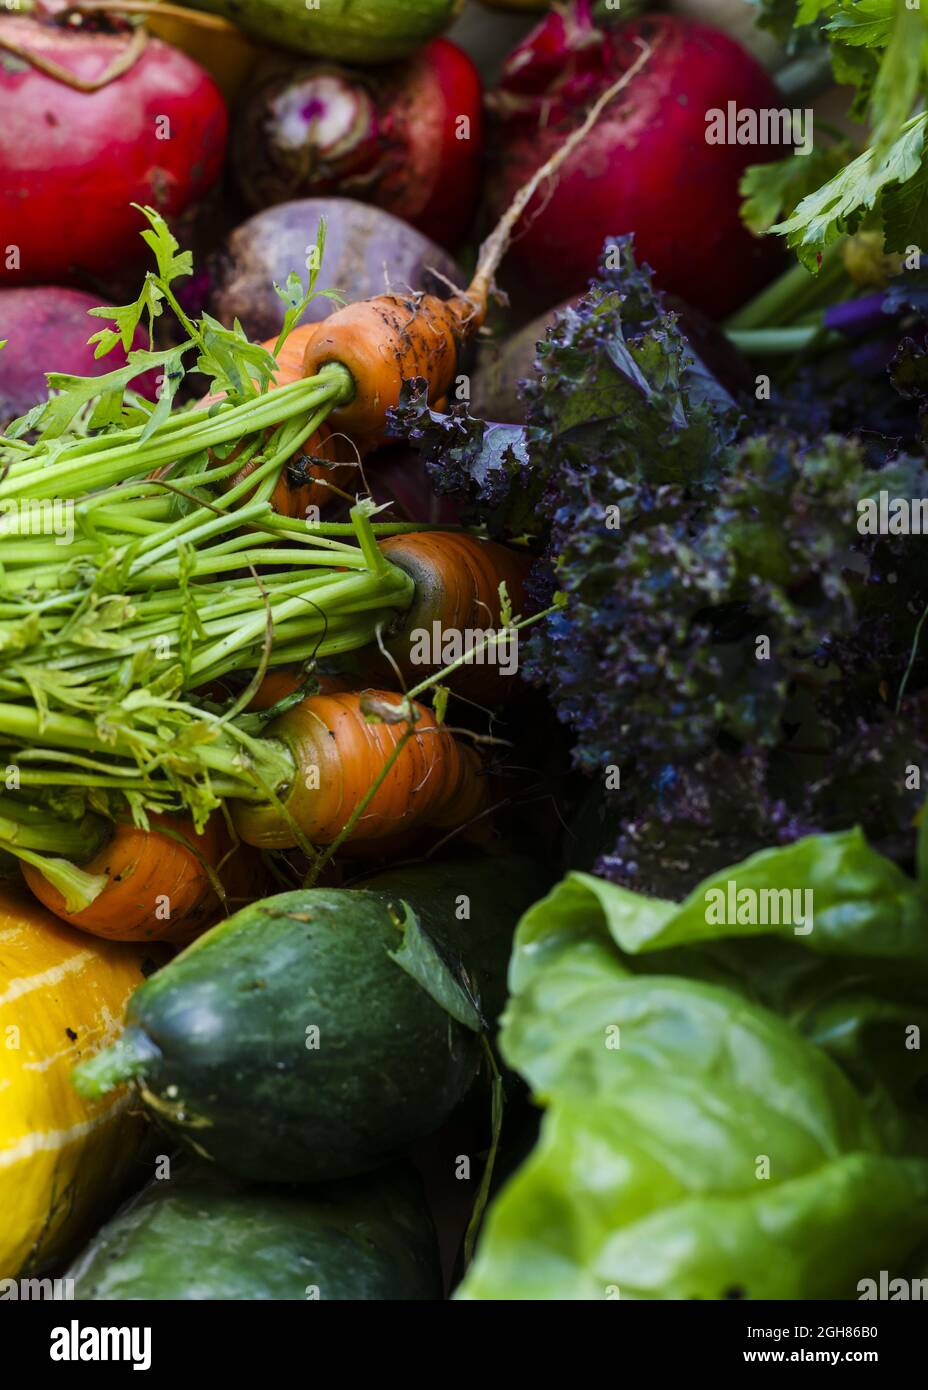 Top view closeup of freshly picked garden vegetables piled up Stock Photo